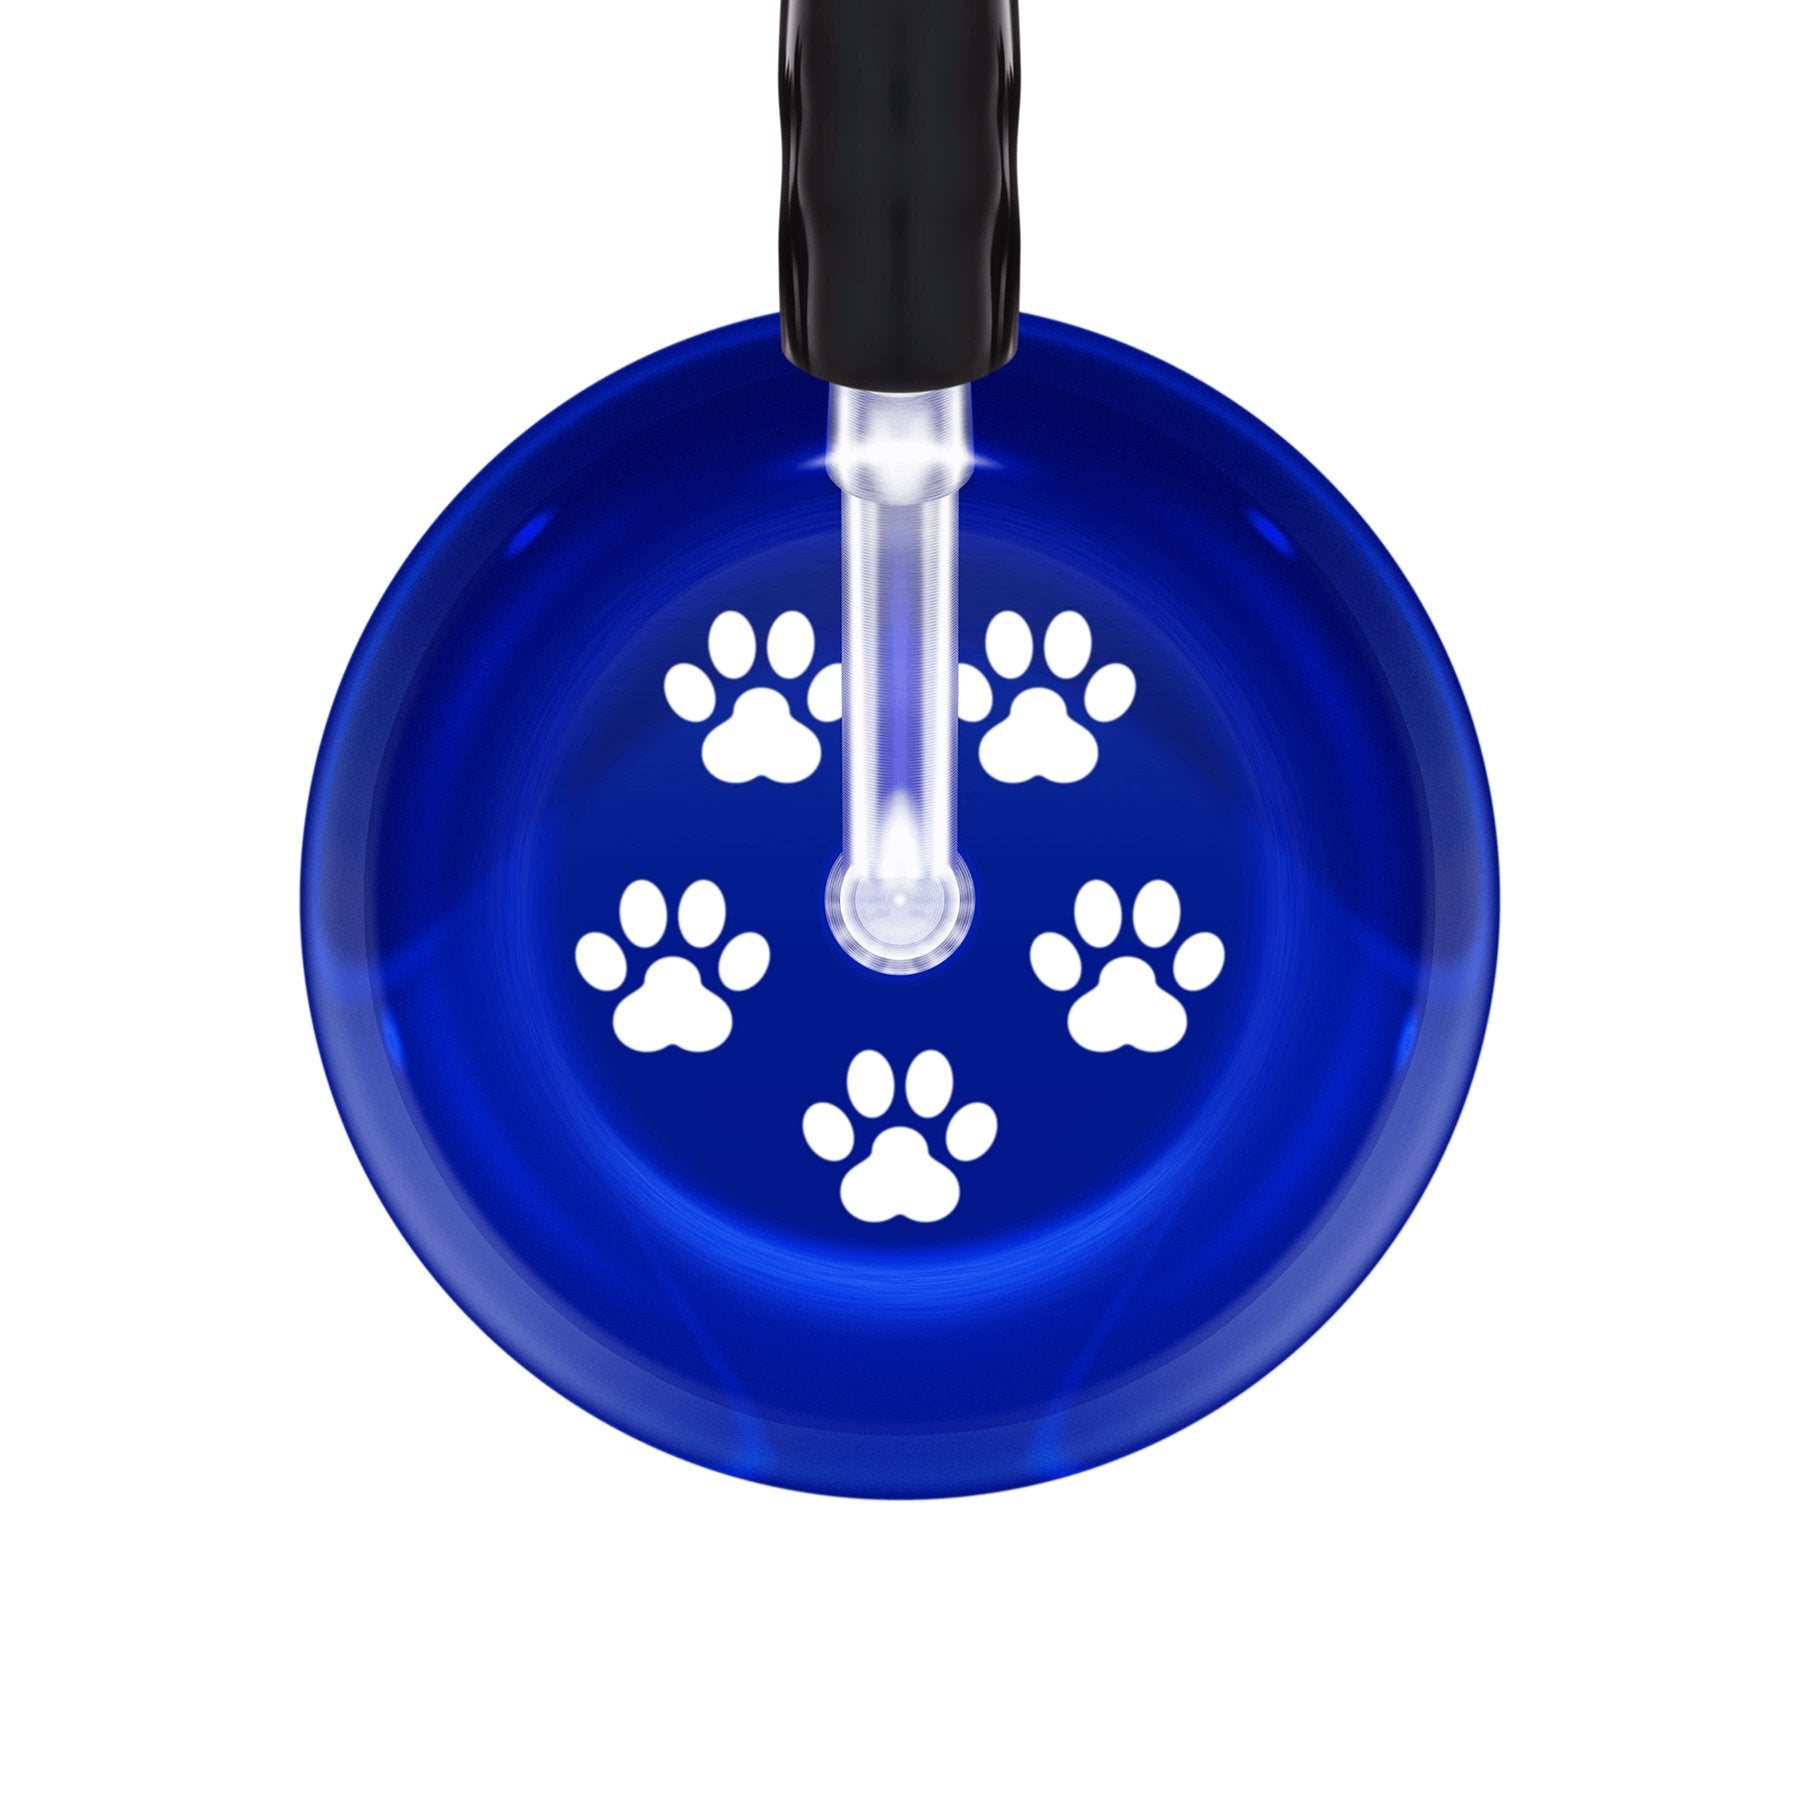 Professional Stethoscope with Multi Color Paw Prints Design